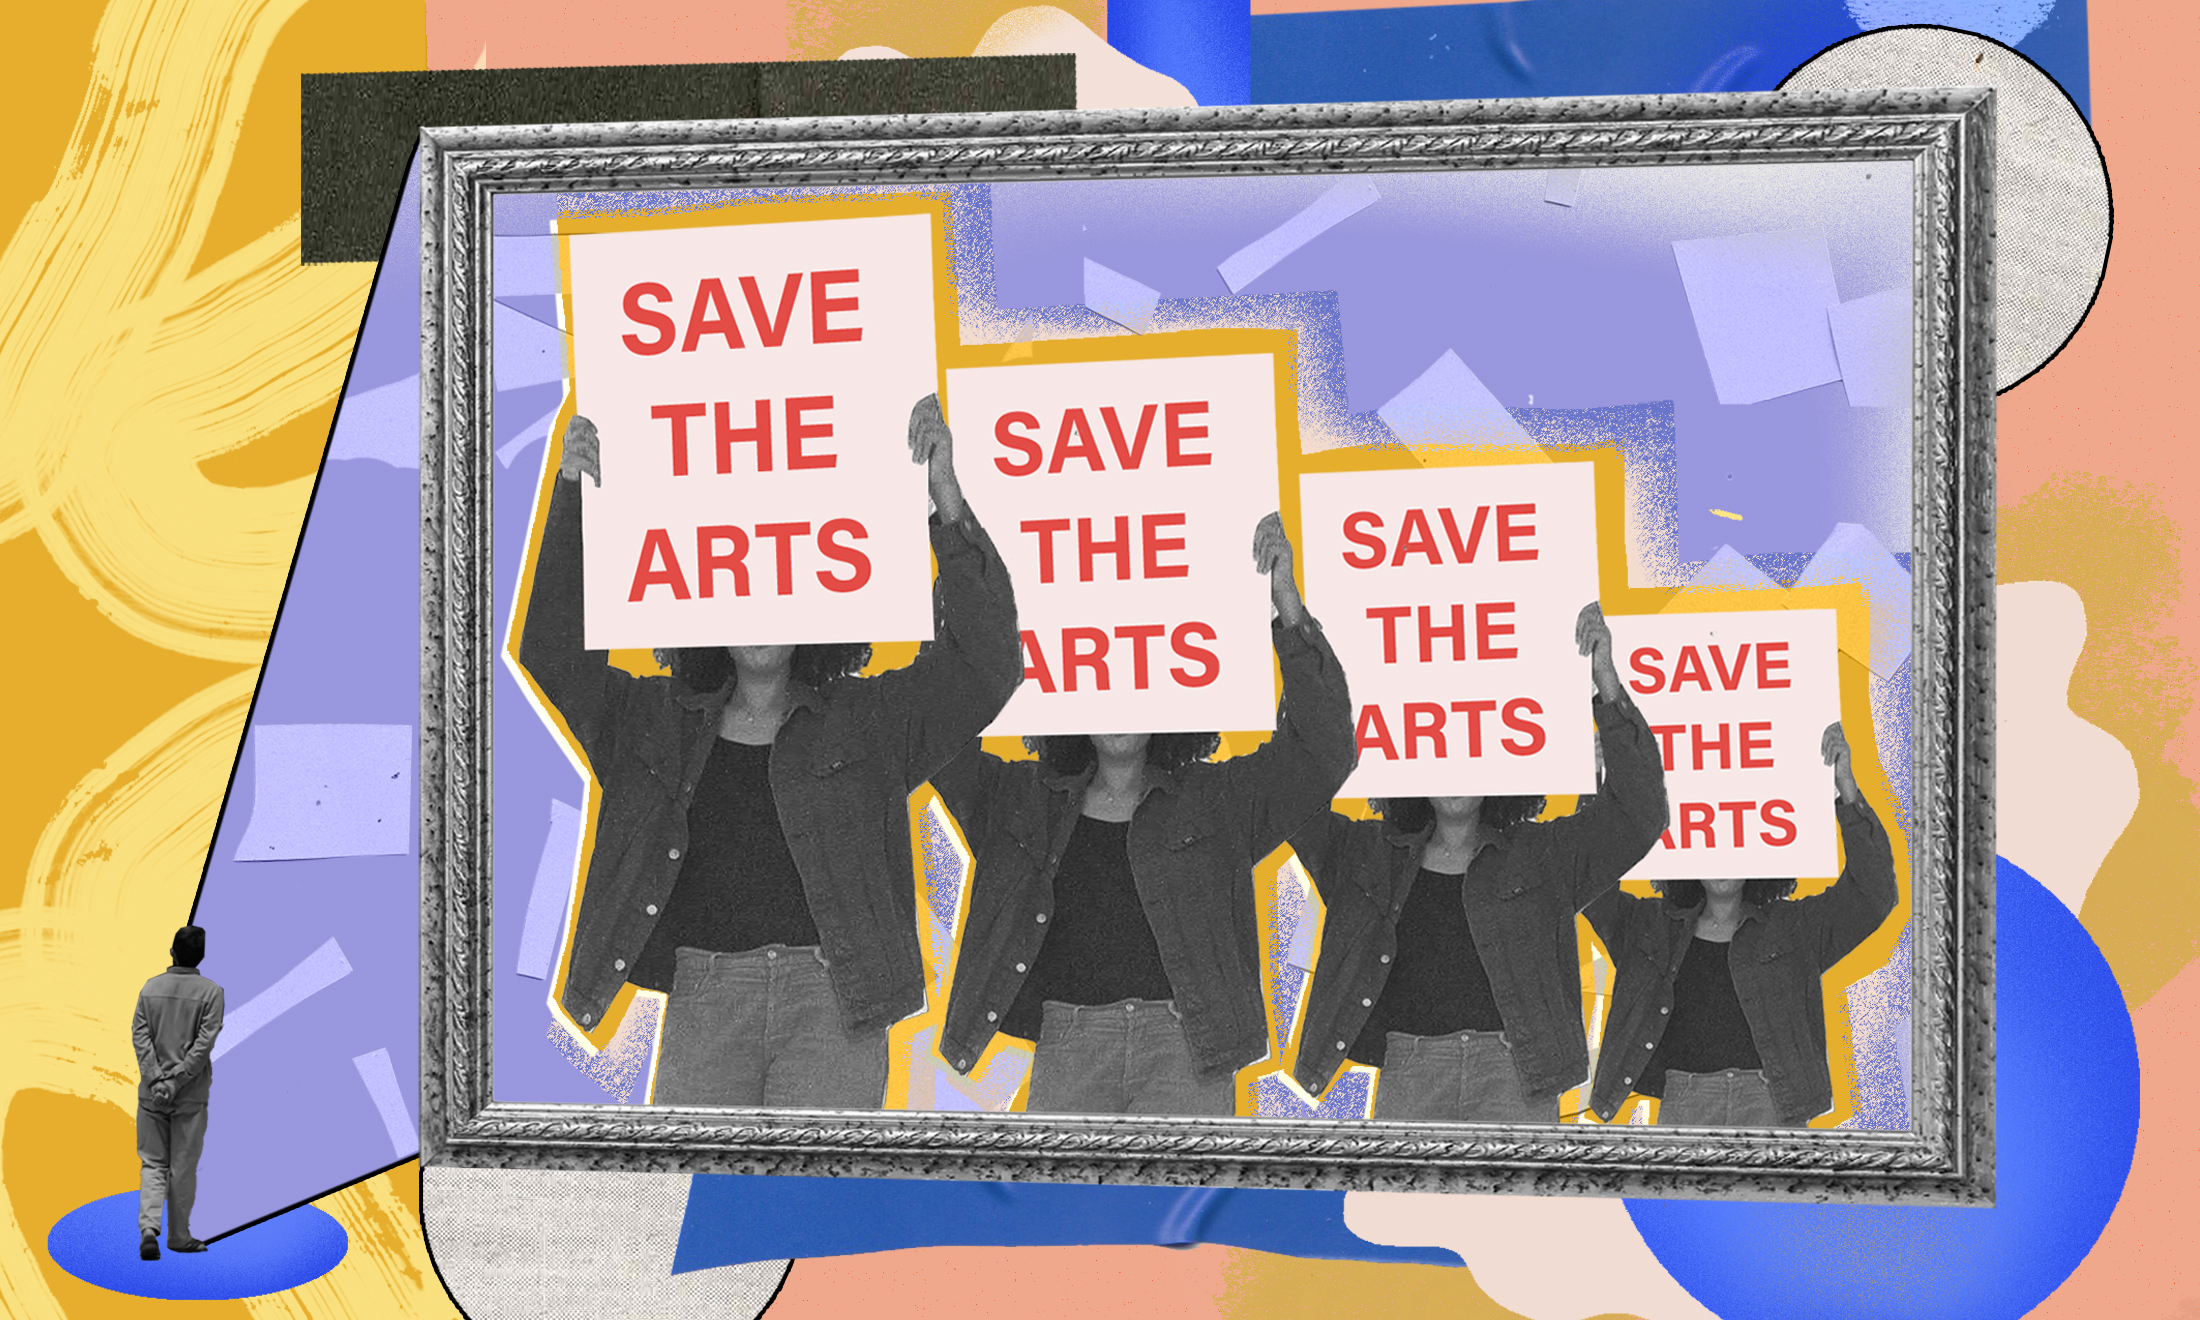 The arts are in crisis